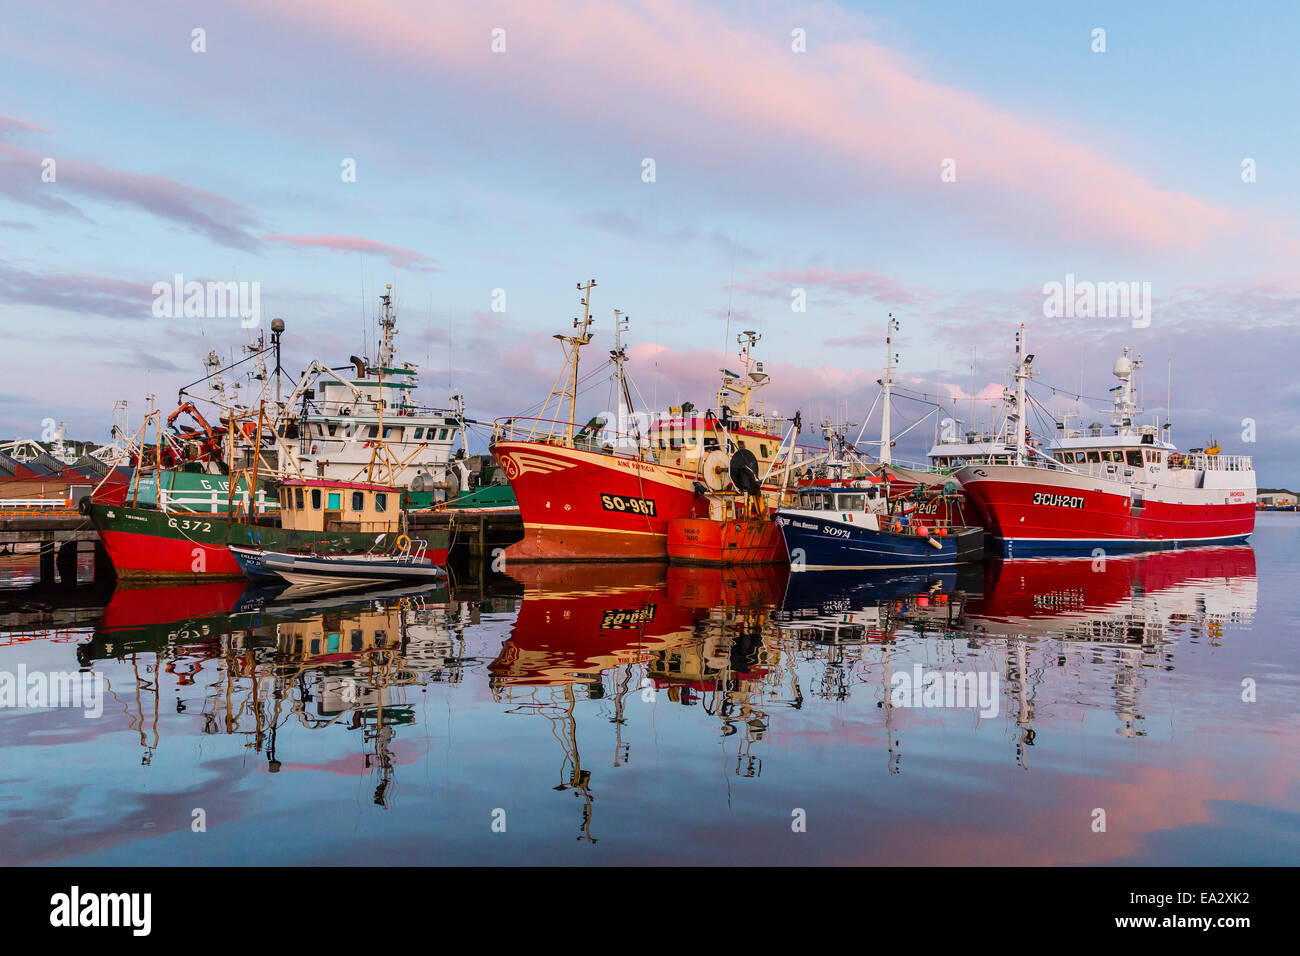 Sunset reflected on the commercial fishing fleet at Killybegs, County Donegal, Ulster, Republic of Ireland Stock Photo